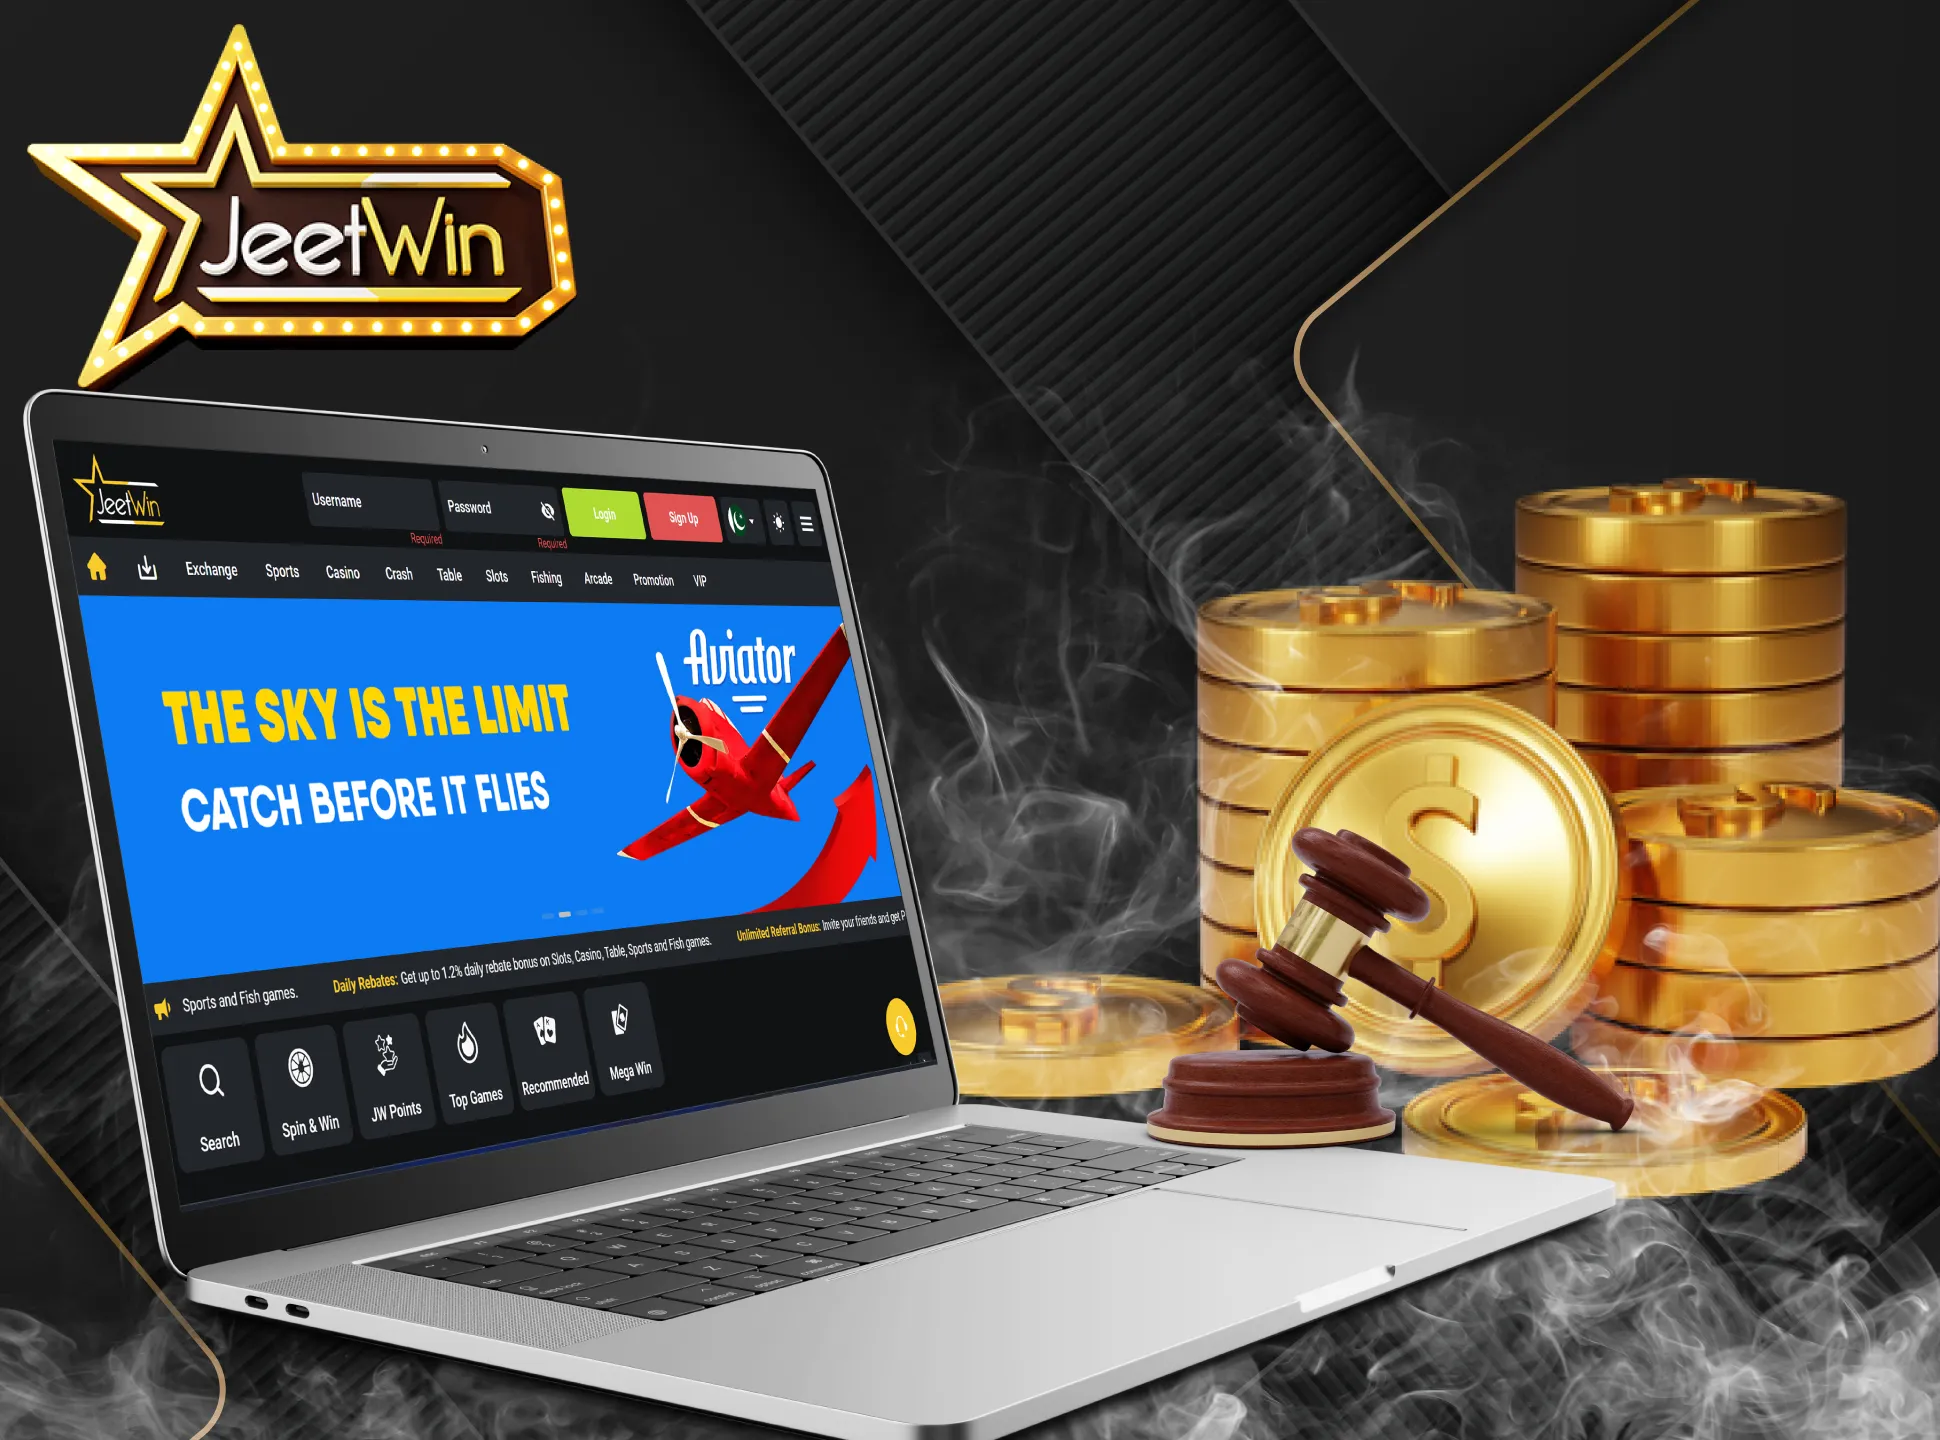 To withdraw funds from JeetWin, go through the account verification process.